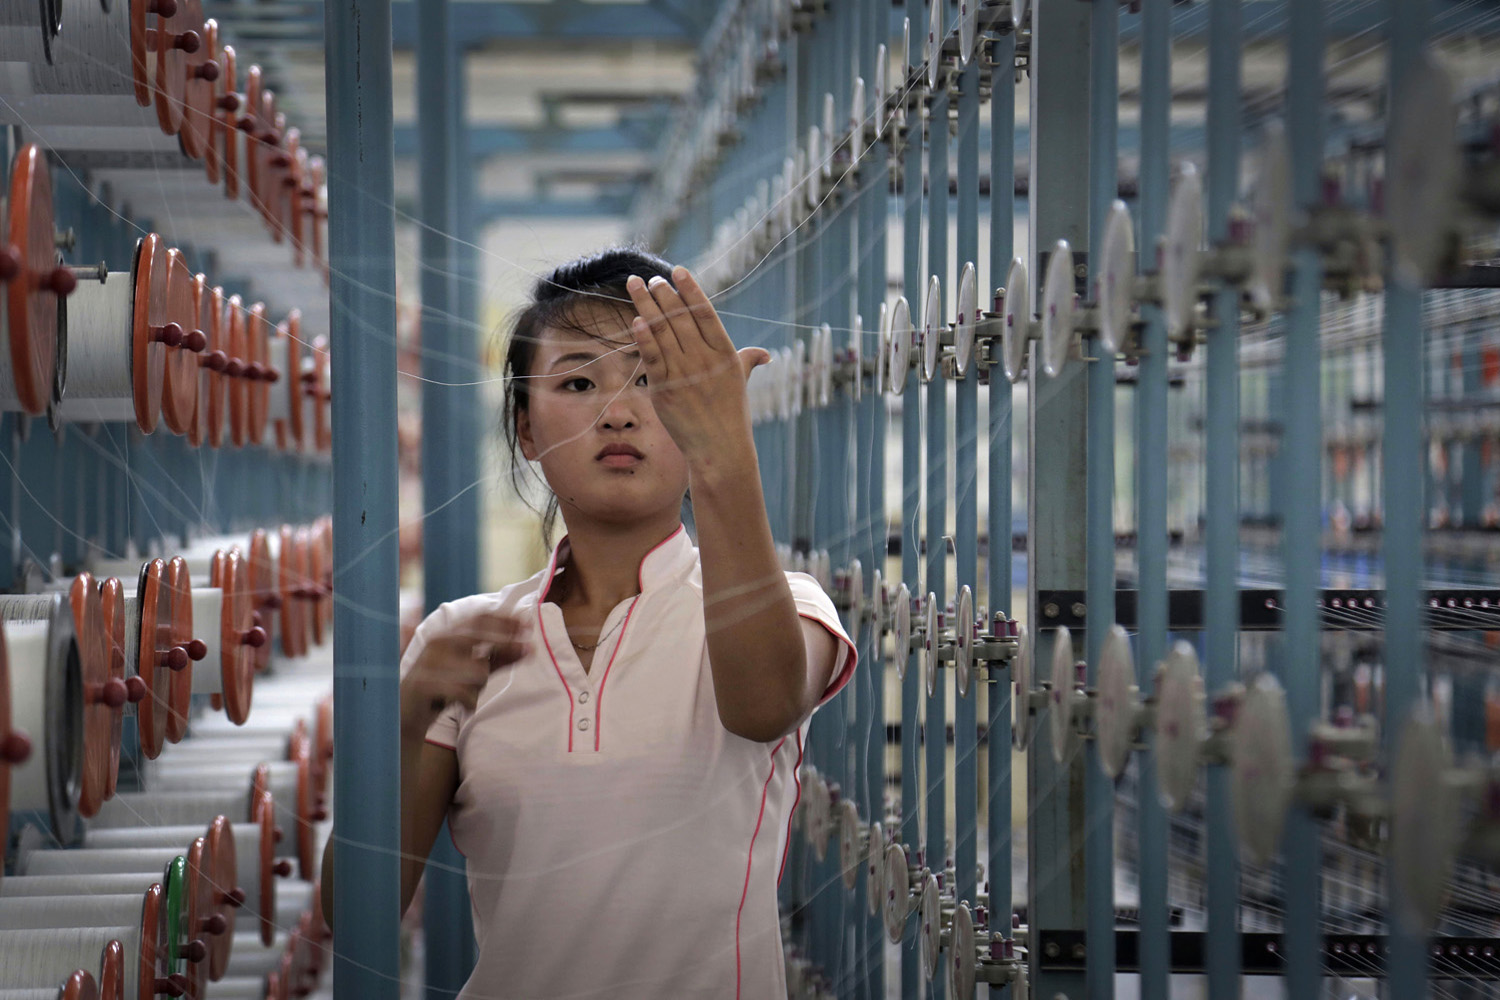 A woman works at the Kim Jong Suk textile factory, the country's largest with 8,500 workers, in Pyongyang, Jul. 31, 2014.